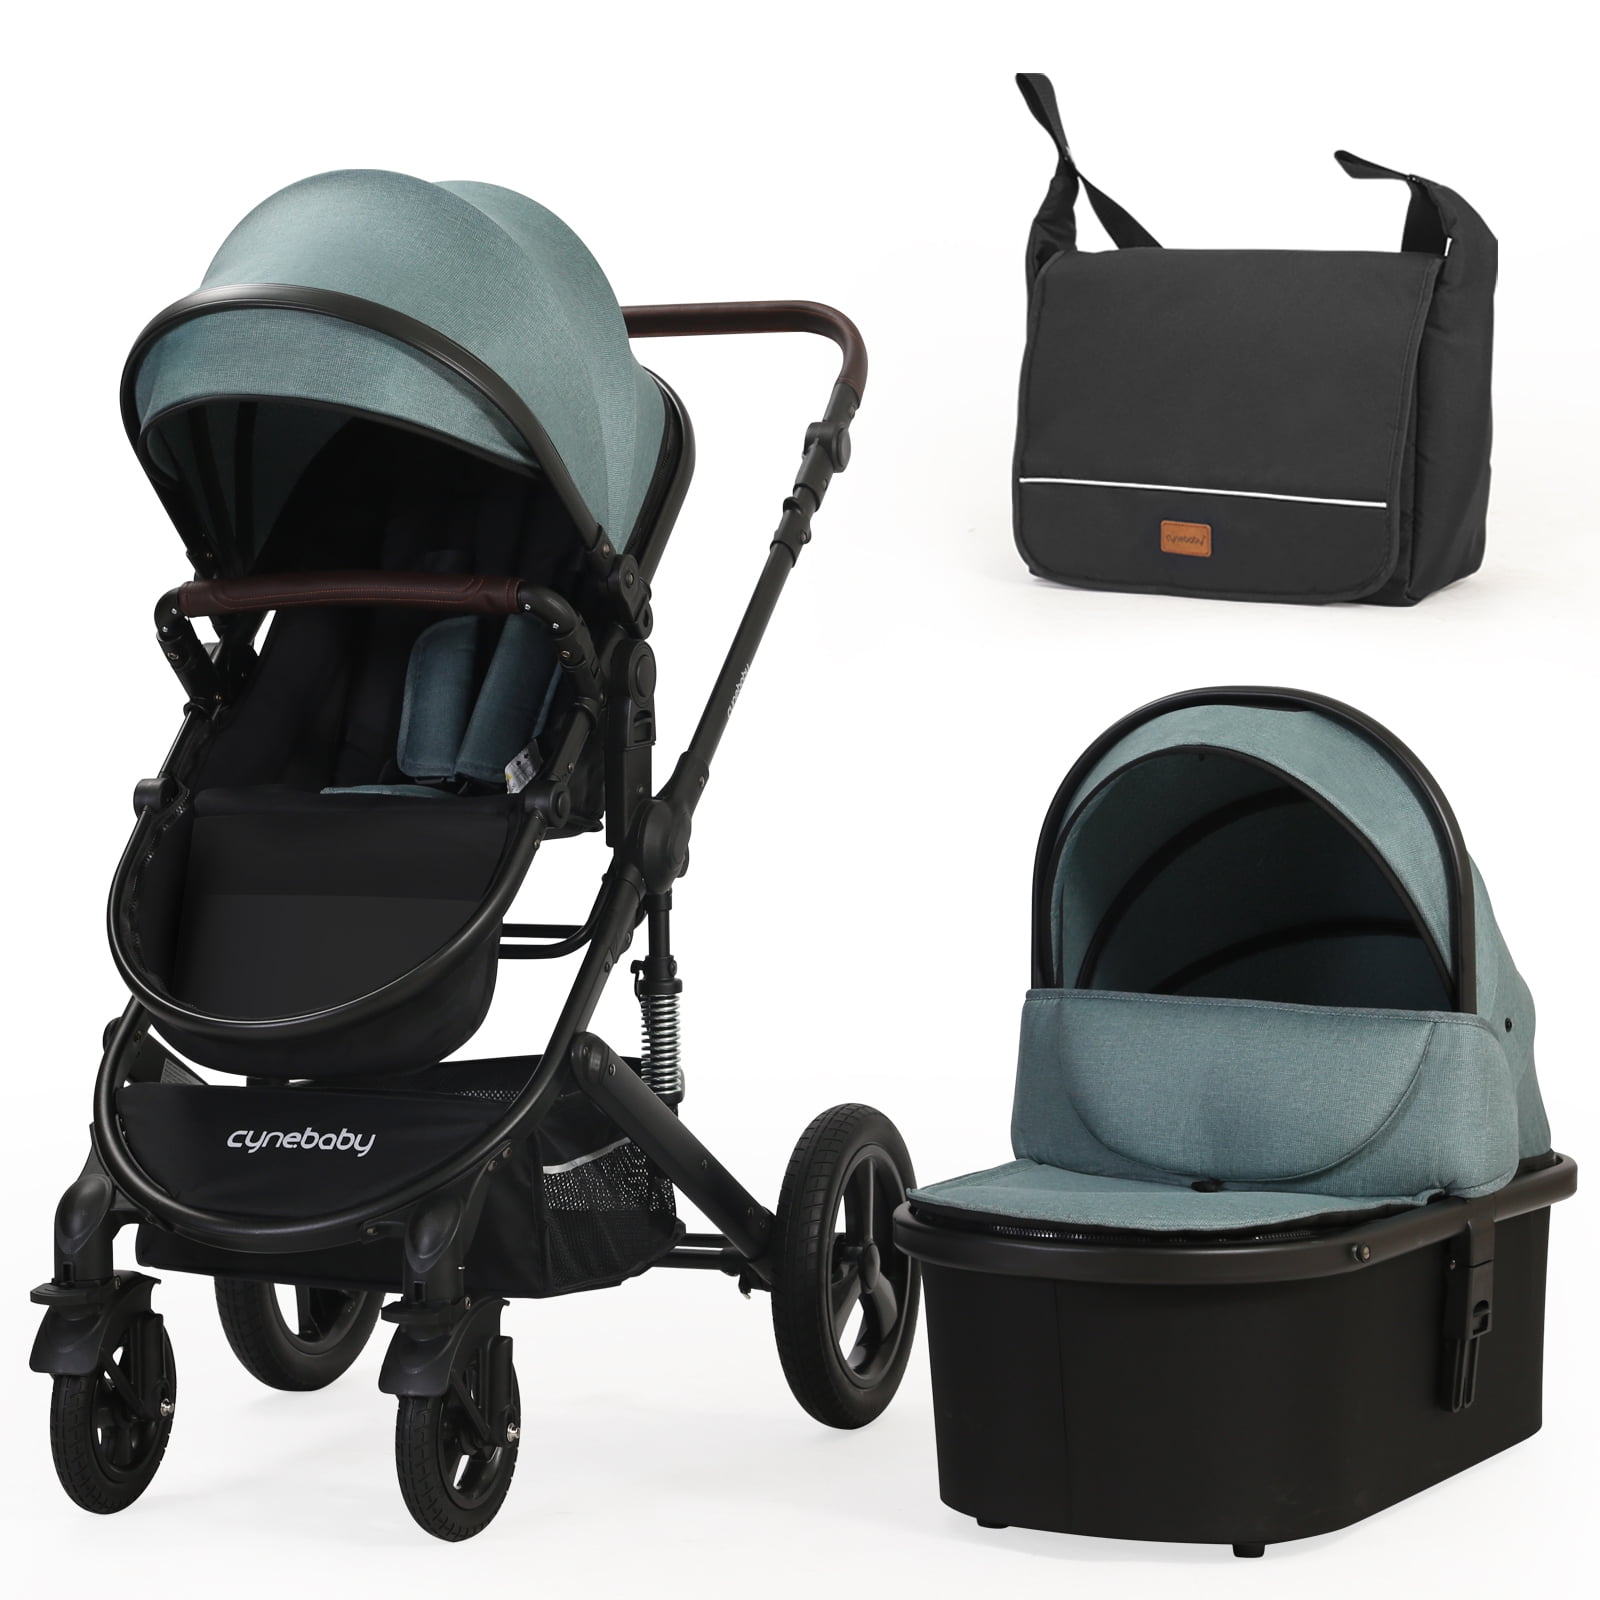 New Baby Stroller Carriage Car Seat 4 in 1High Landscape foldable pushchair&Car 